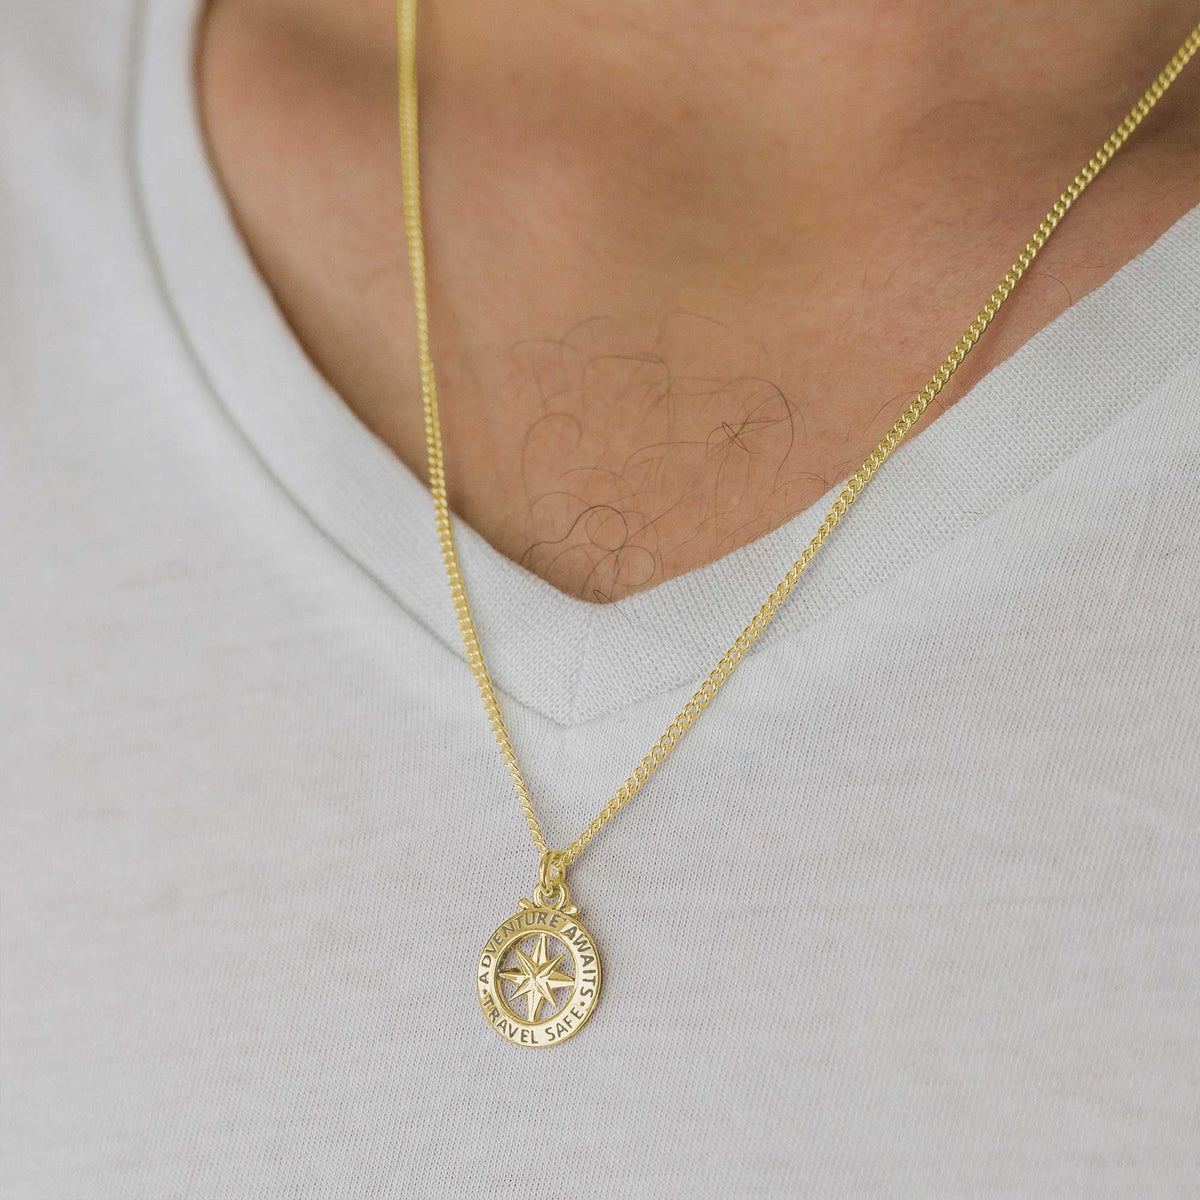 small solid 9ct gold st christopher alternative necklace compass pendant